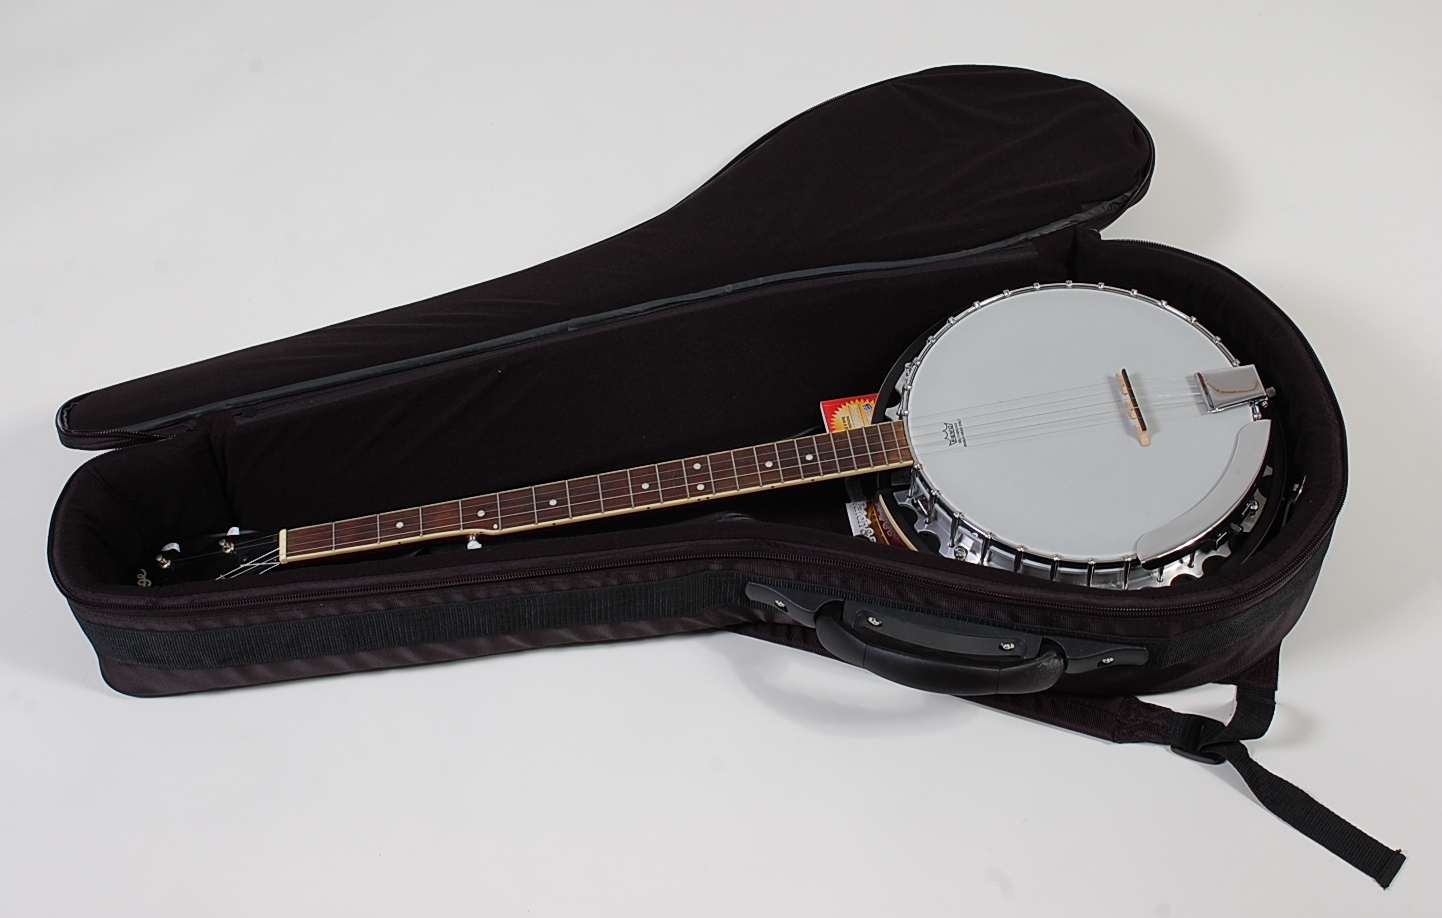 A five-string banjo by Vintage, with 'Reno' Weatherking banjo head, - Image 2 of 2